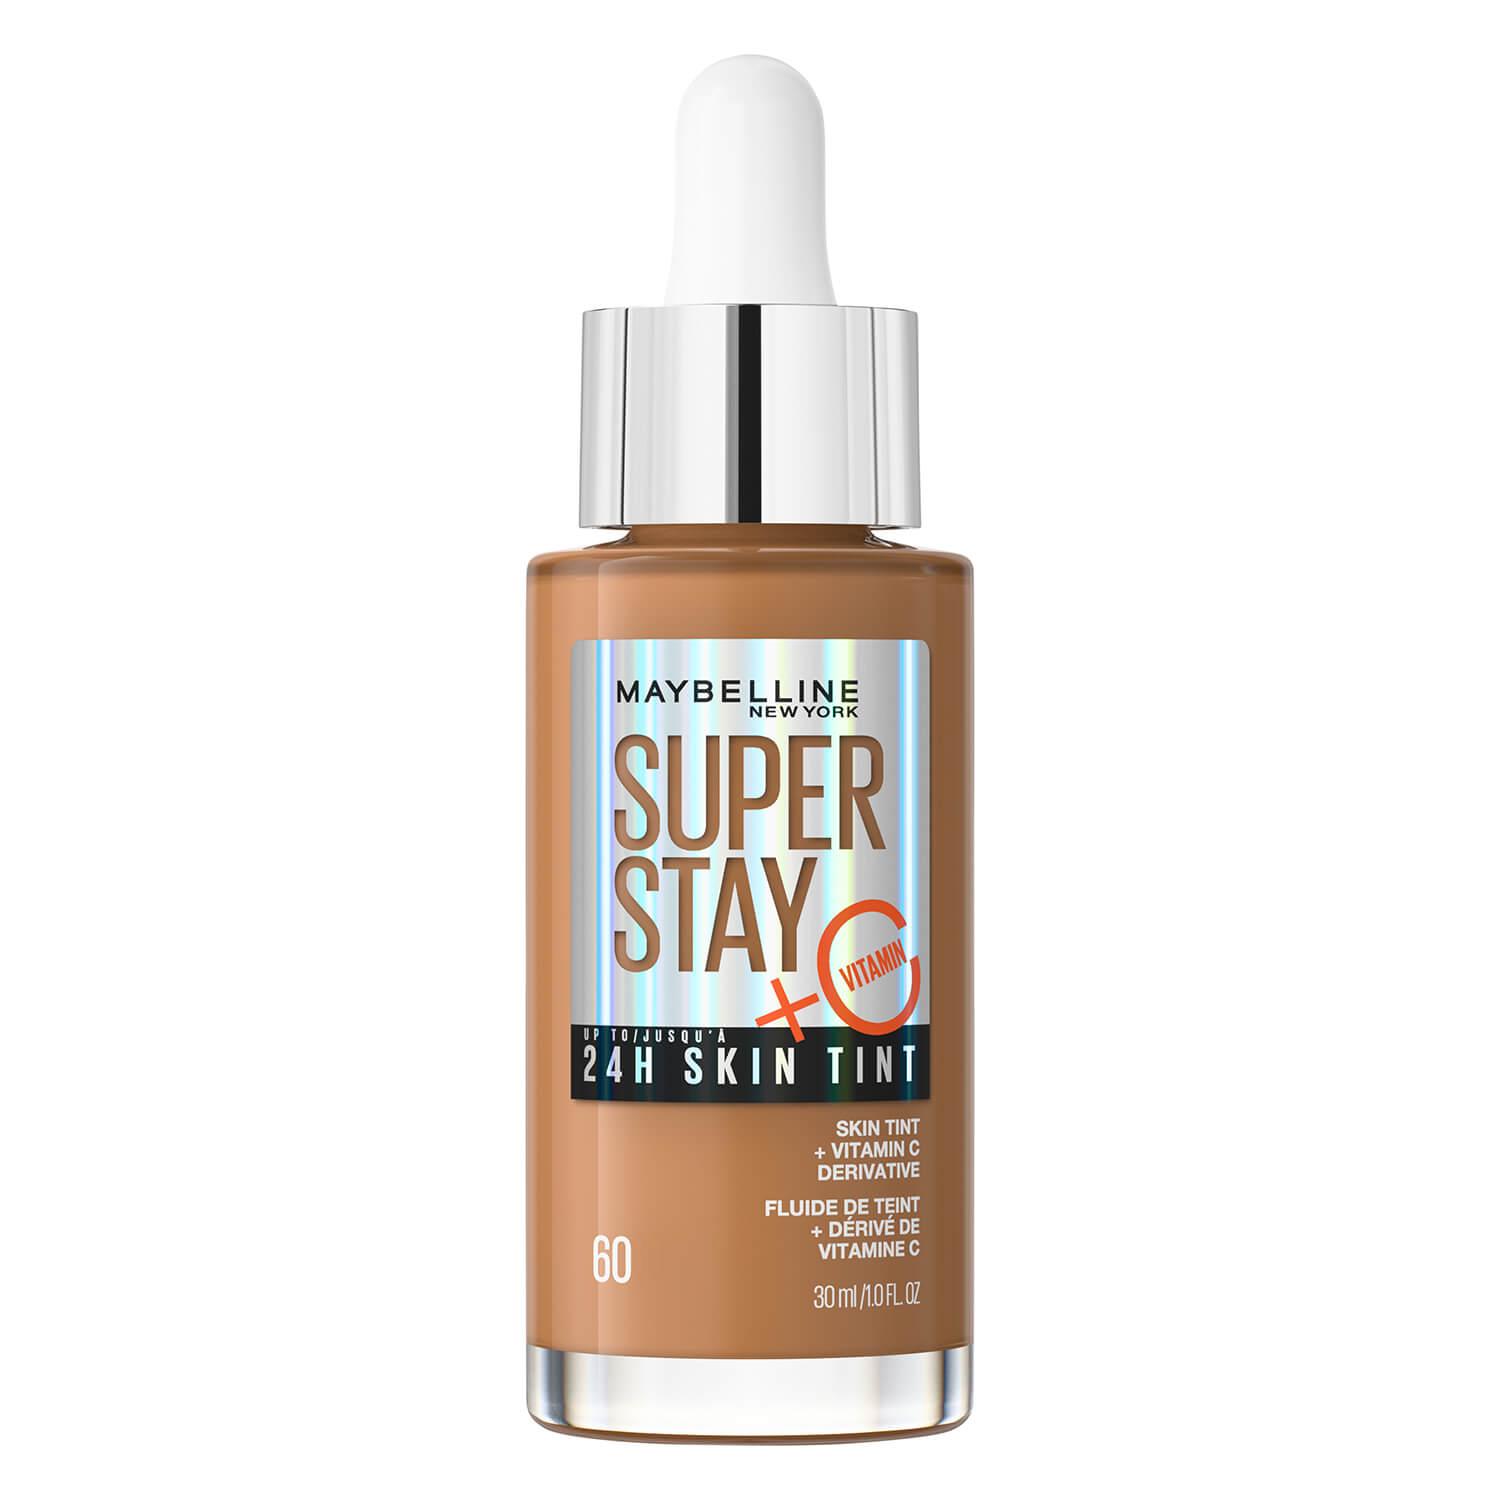 Maybelline NY Teint - Super Stay 24H Skin Tint Caramel 60